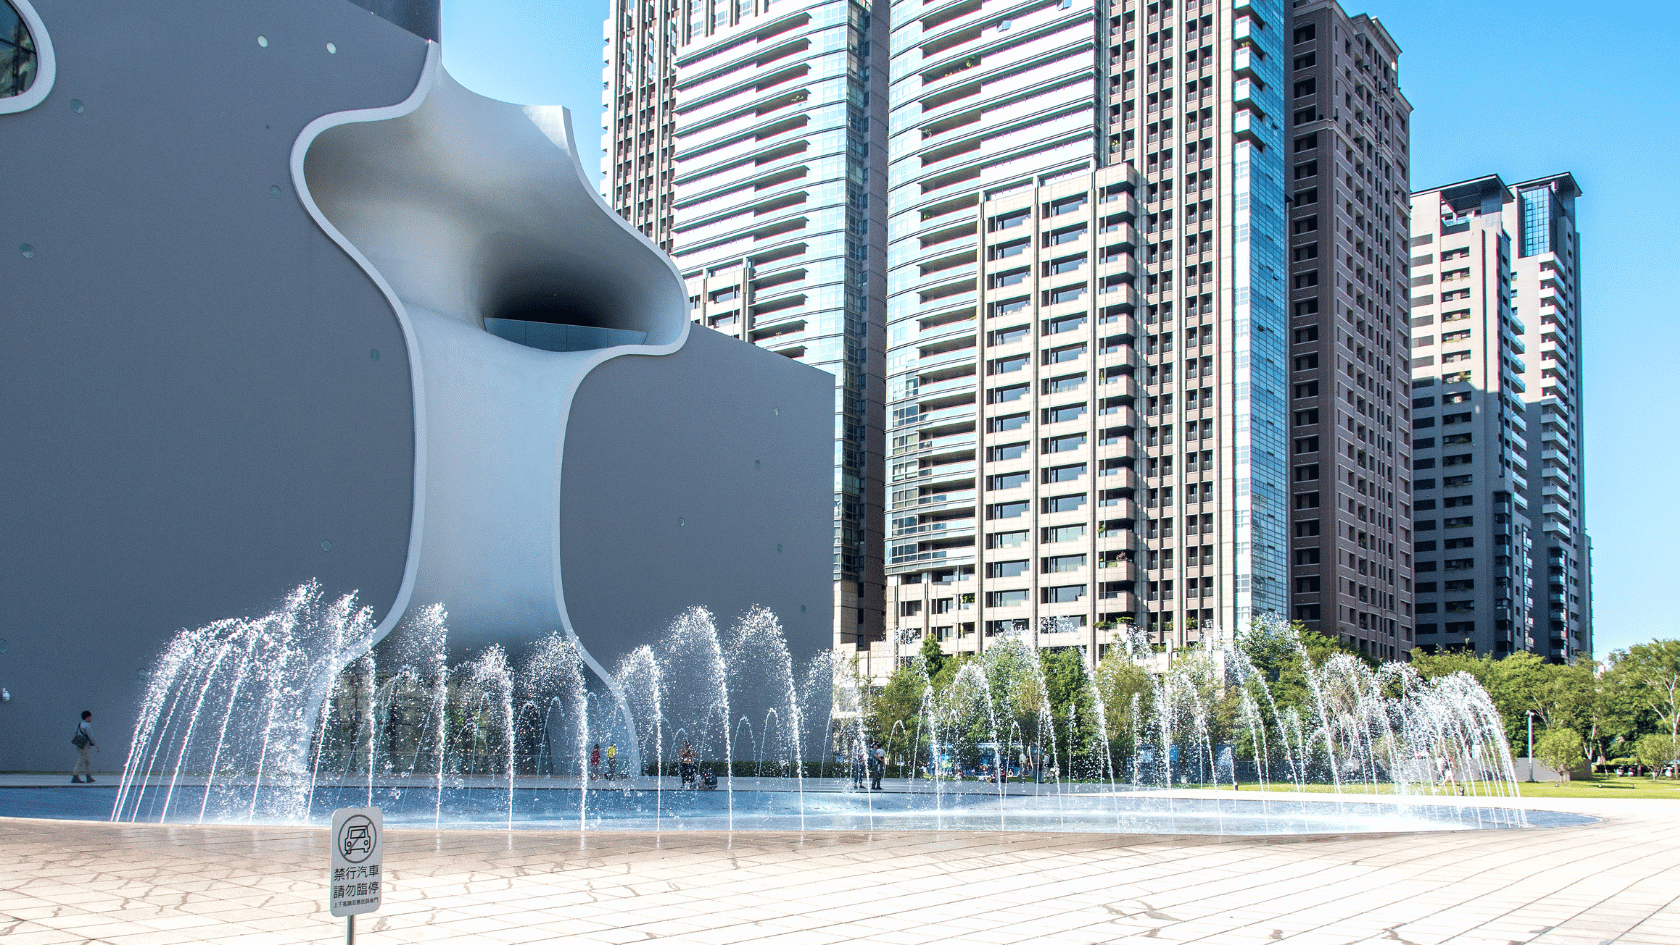 A fountain beside a row of skyscrapers